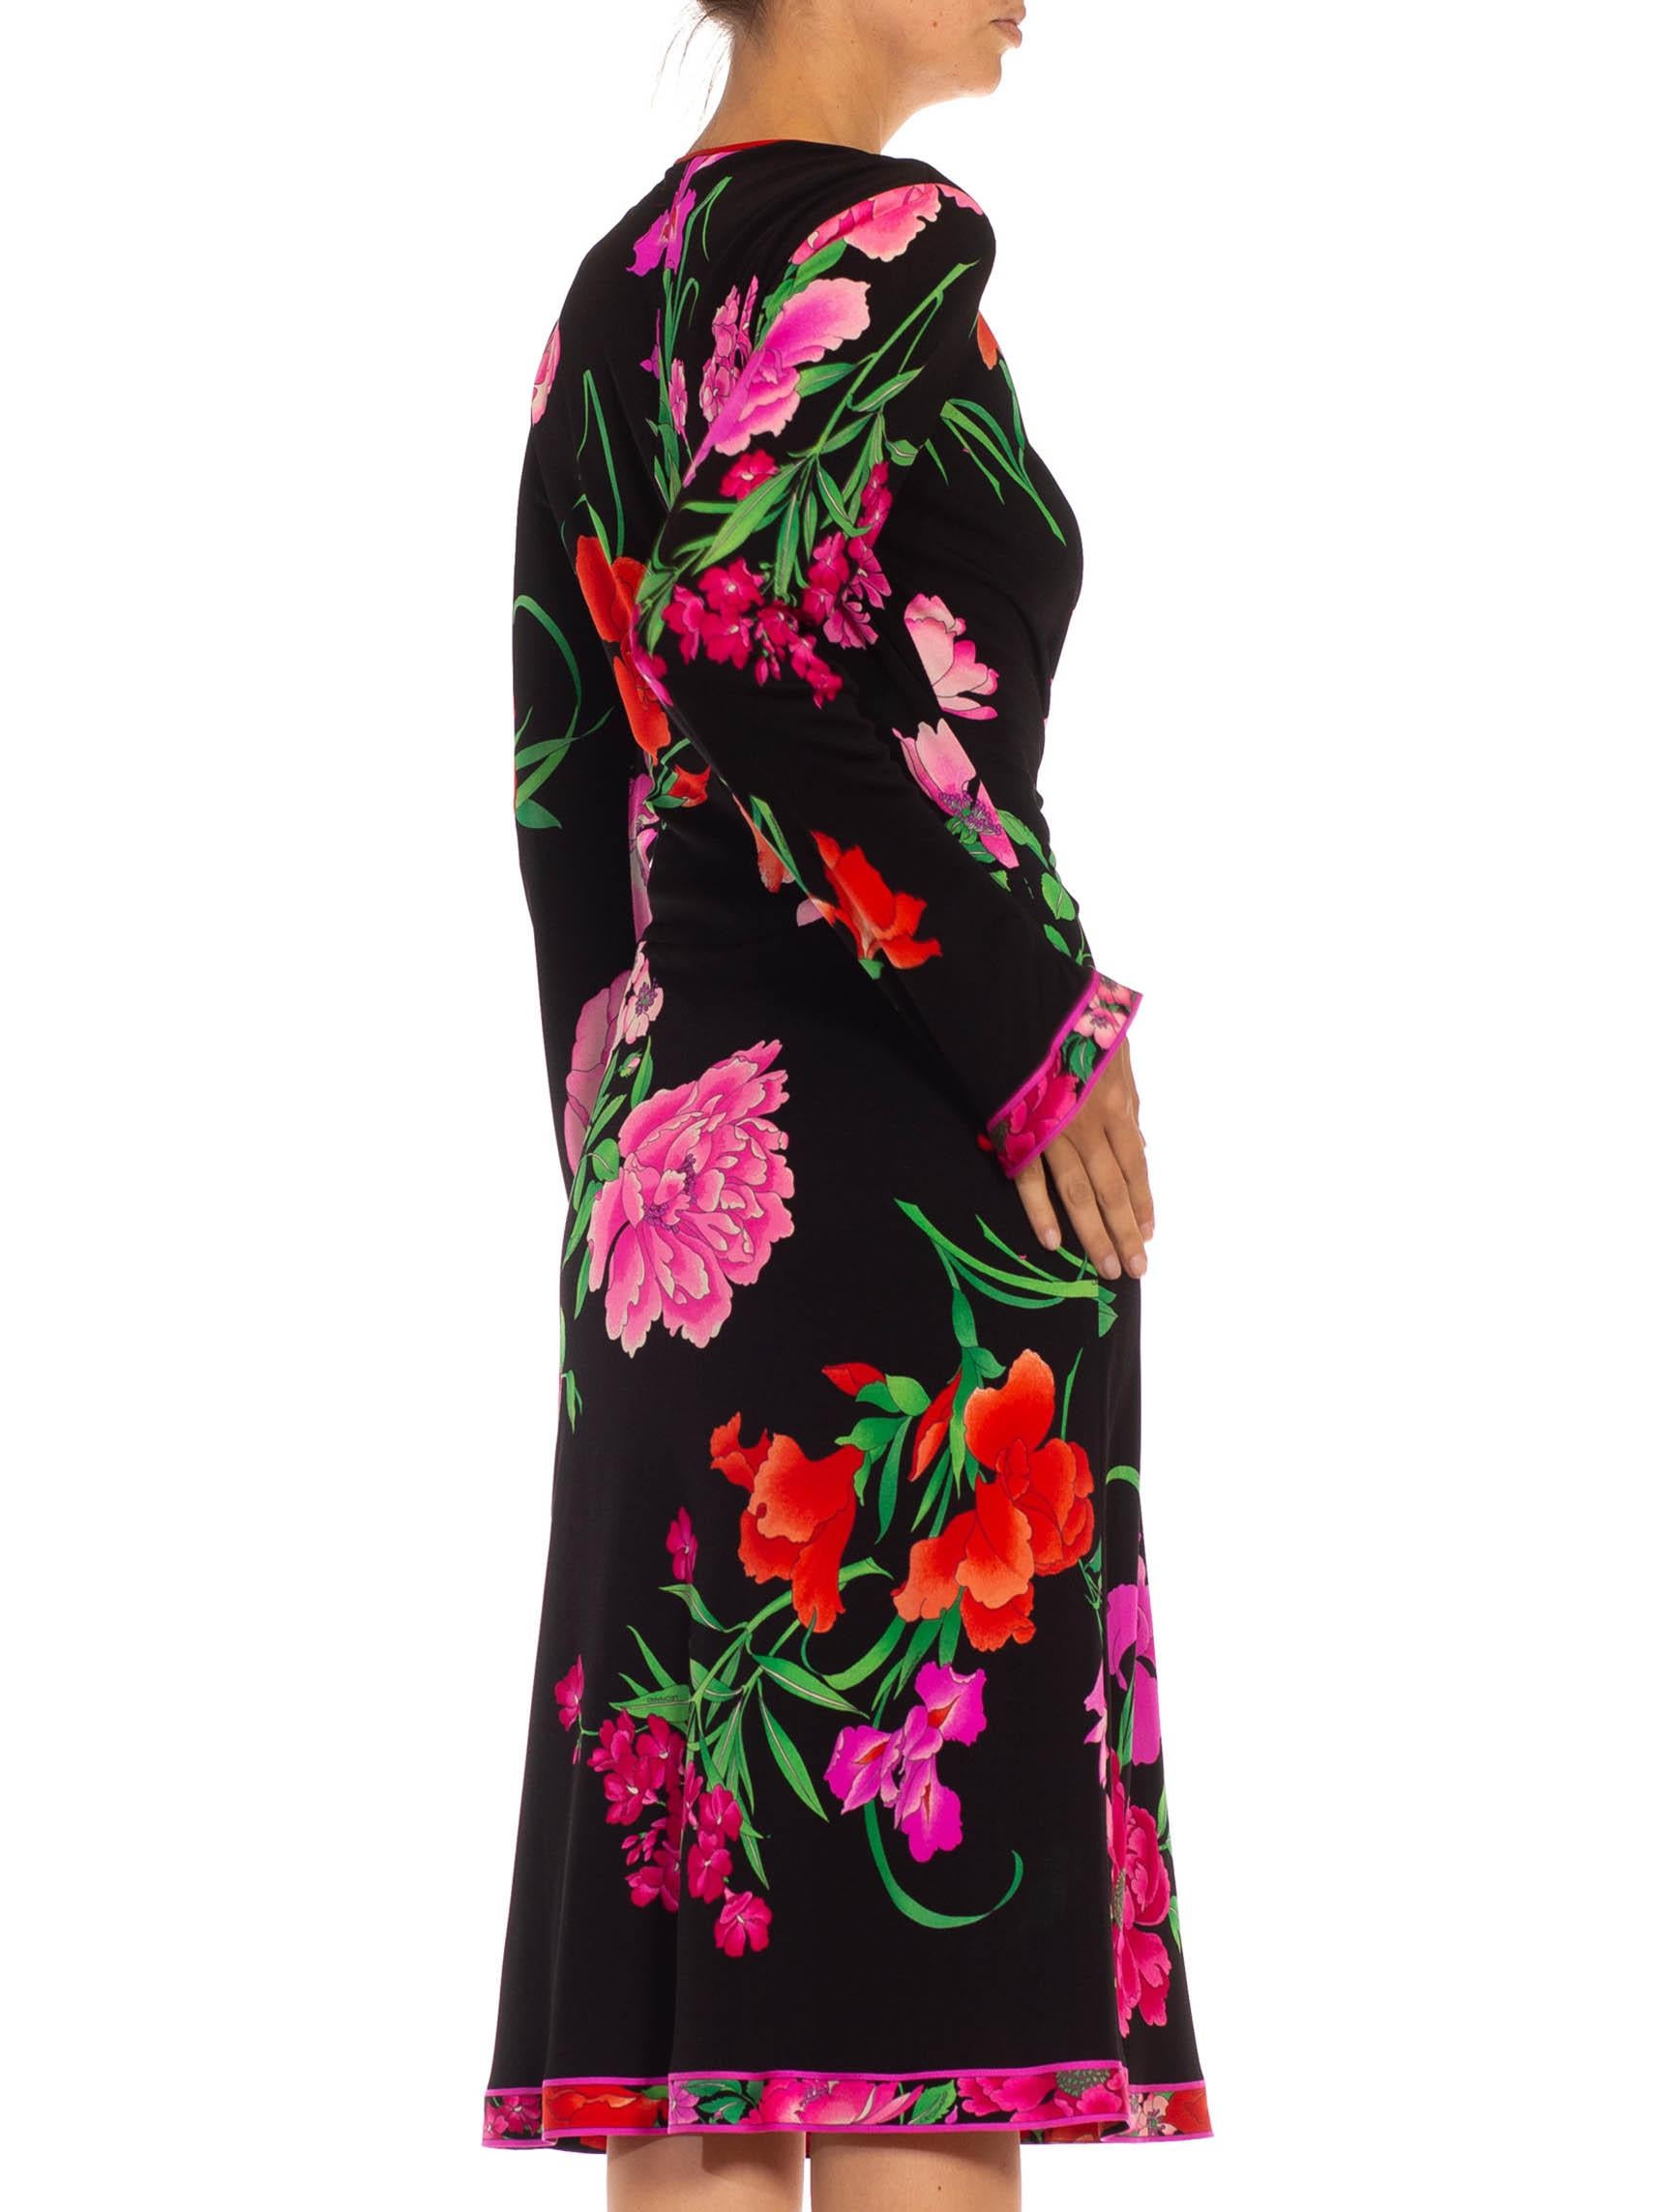 Women's 1980S LEONARD Black & Pink Polyester Jersey Front Ruched Floral Dress For Sale